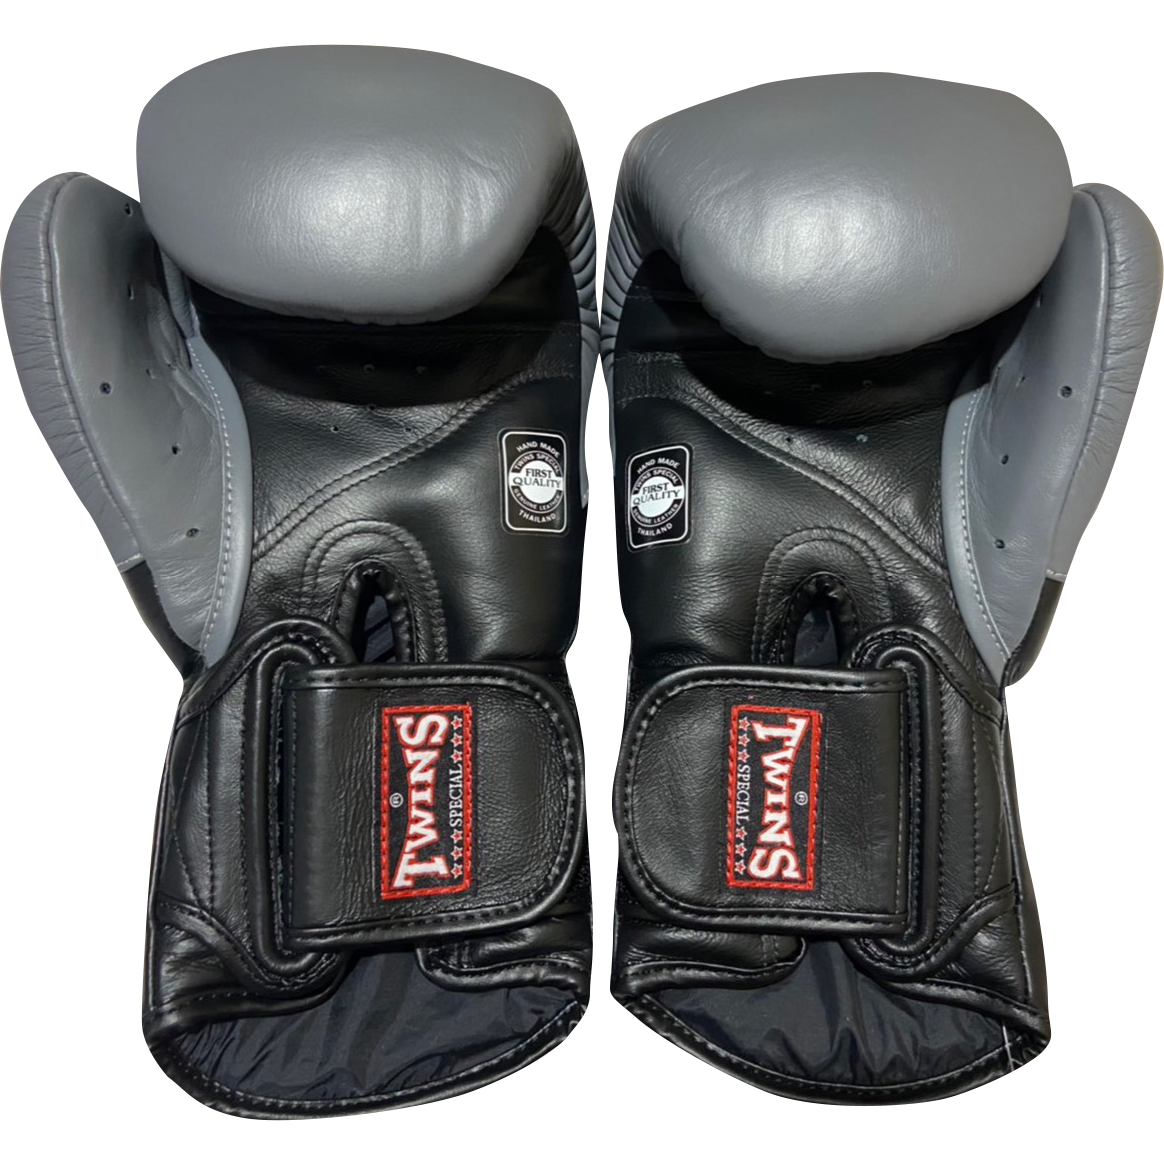 Twins Special Boxing Gloves BGVL6 Black Grey